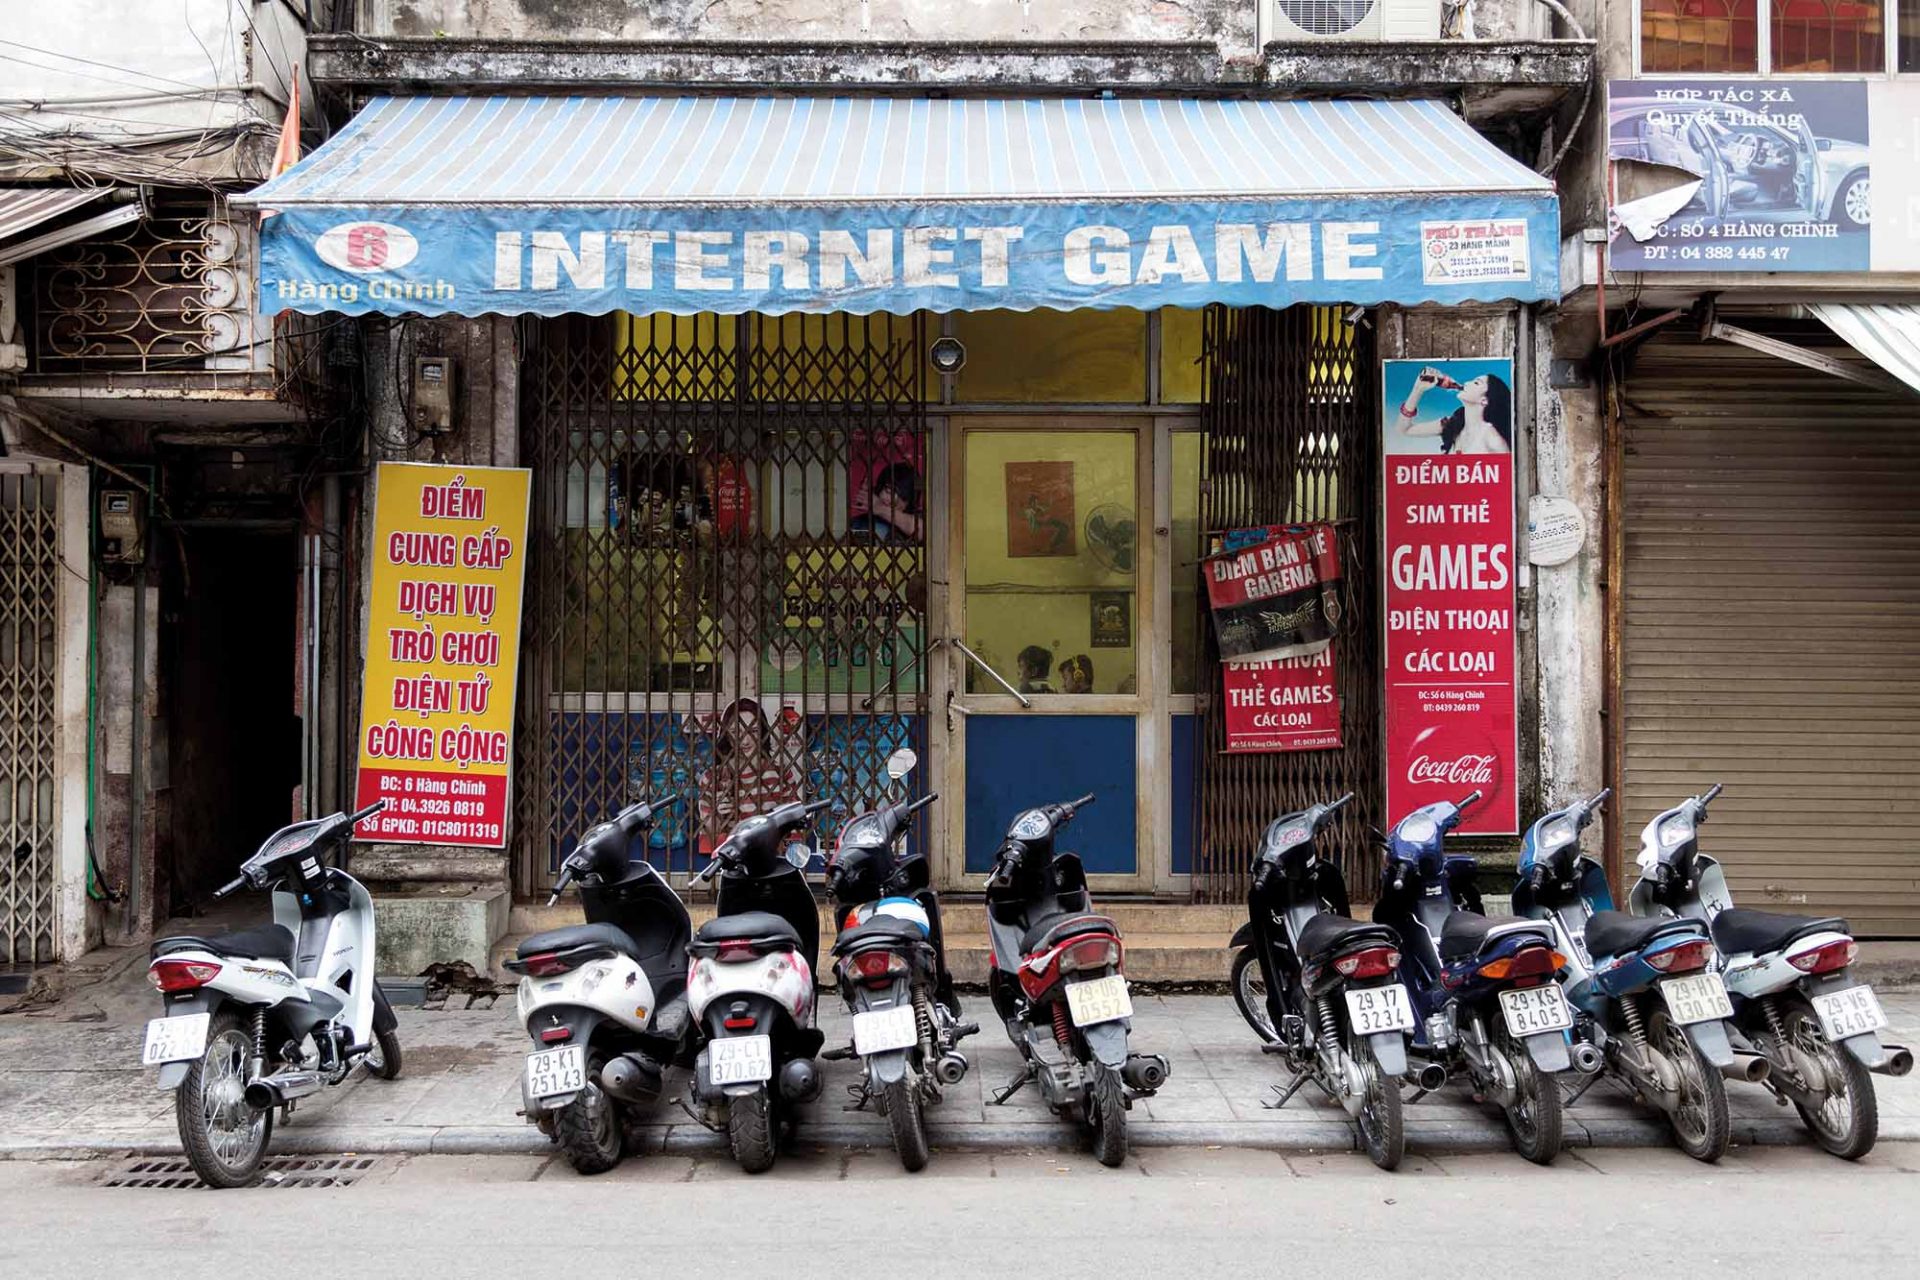 Exterior Of An Internet Cafe In Hanoi Vietnam, Early In The Morning. People Inside Must Have Been There All Night.